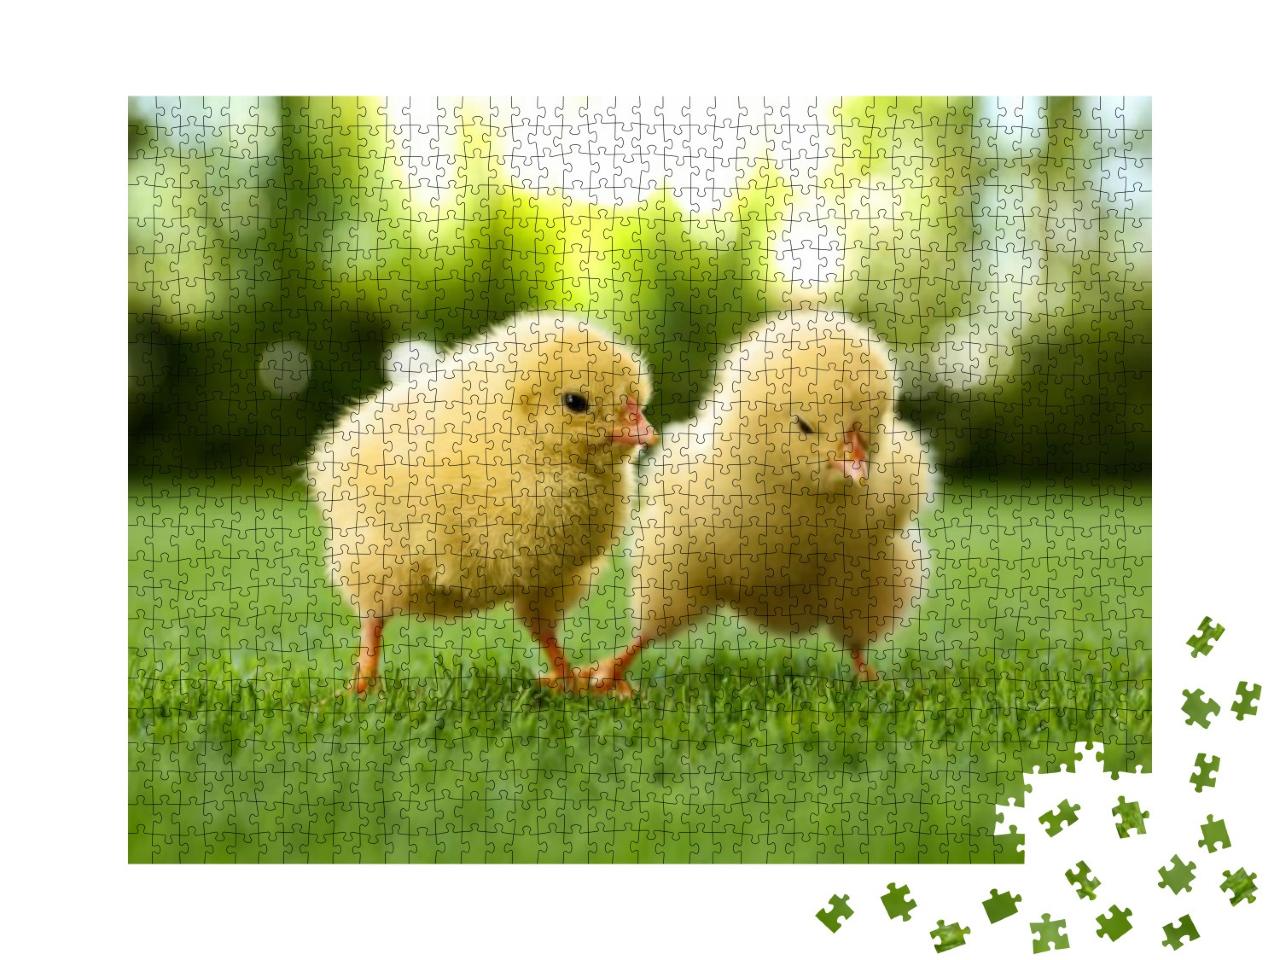 Cute Fluffy Baby Chickens Together on Green Grass Outdoor... Jigsaw Puzzle with 1000 pieces